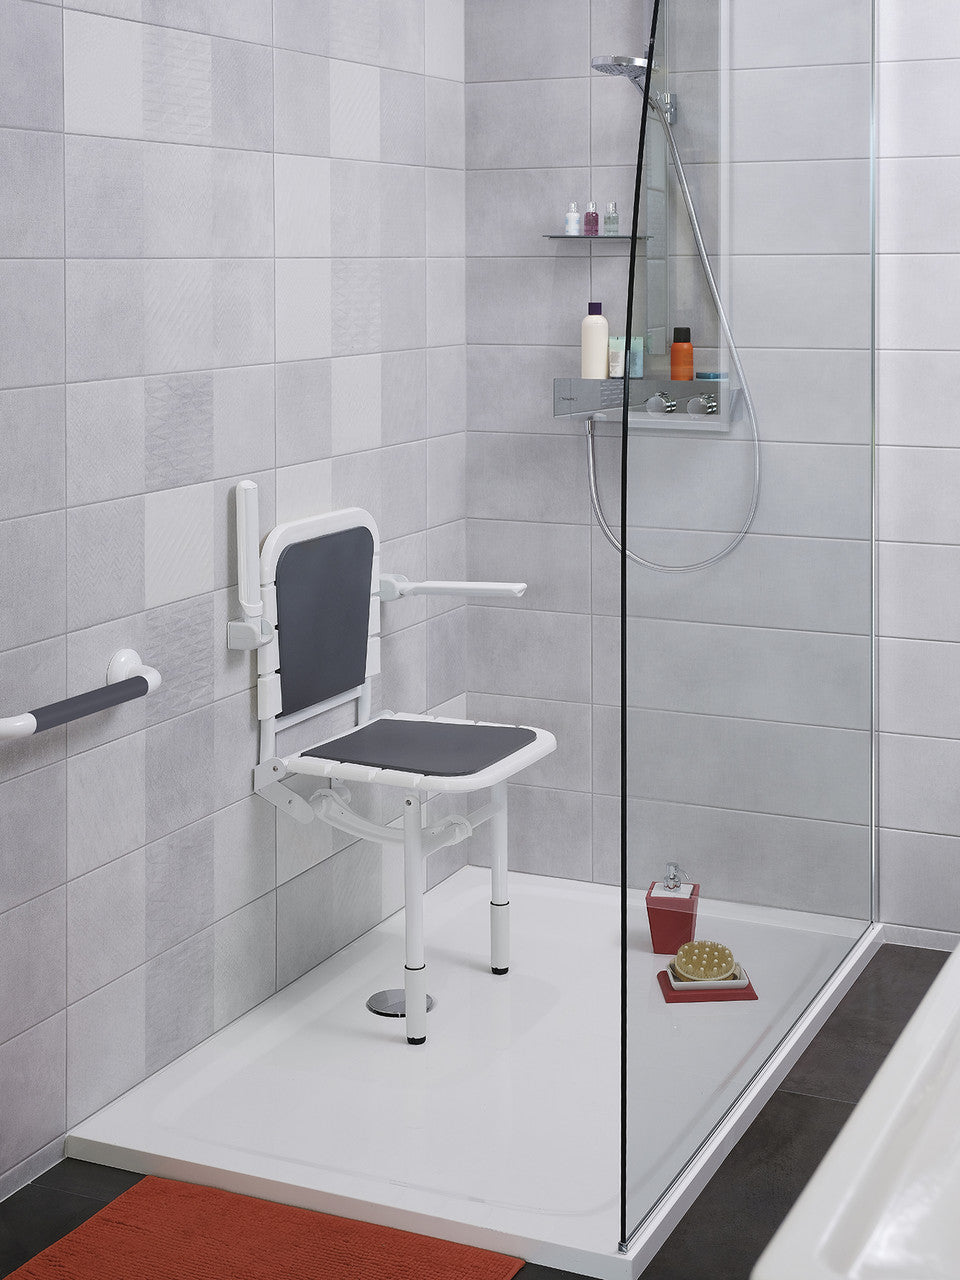 Comfortique adjustable height wall mounted foldaway shower chair & matching back rest and hinged arms